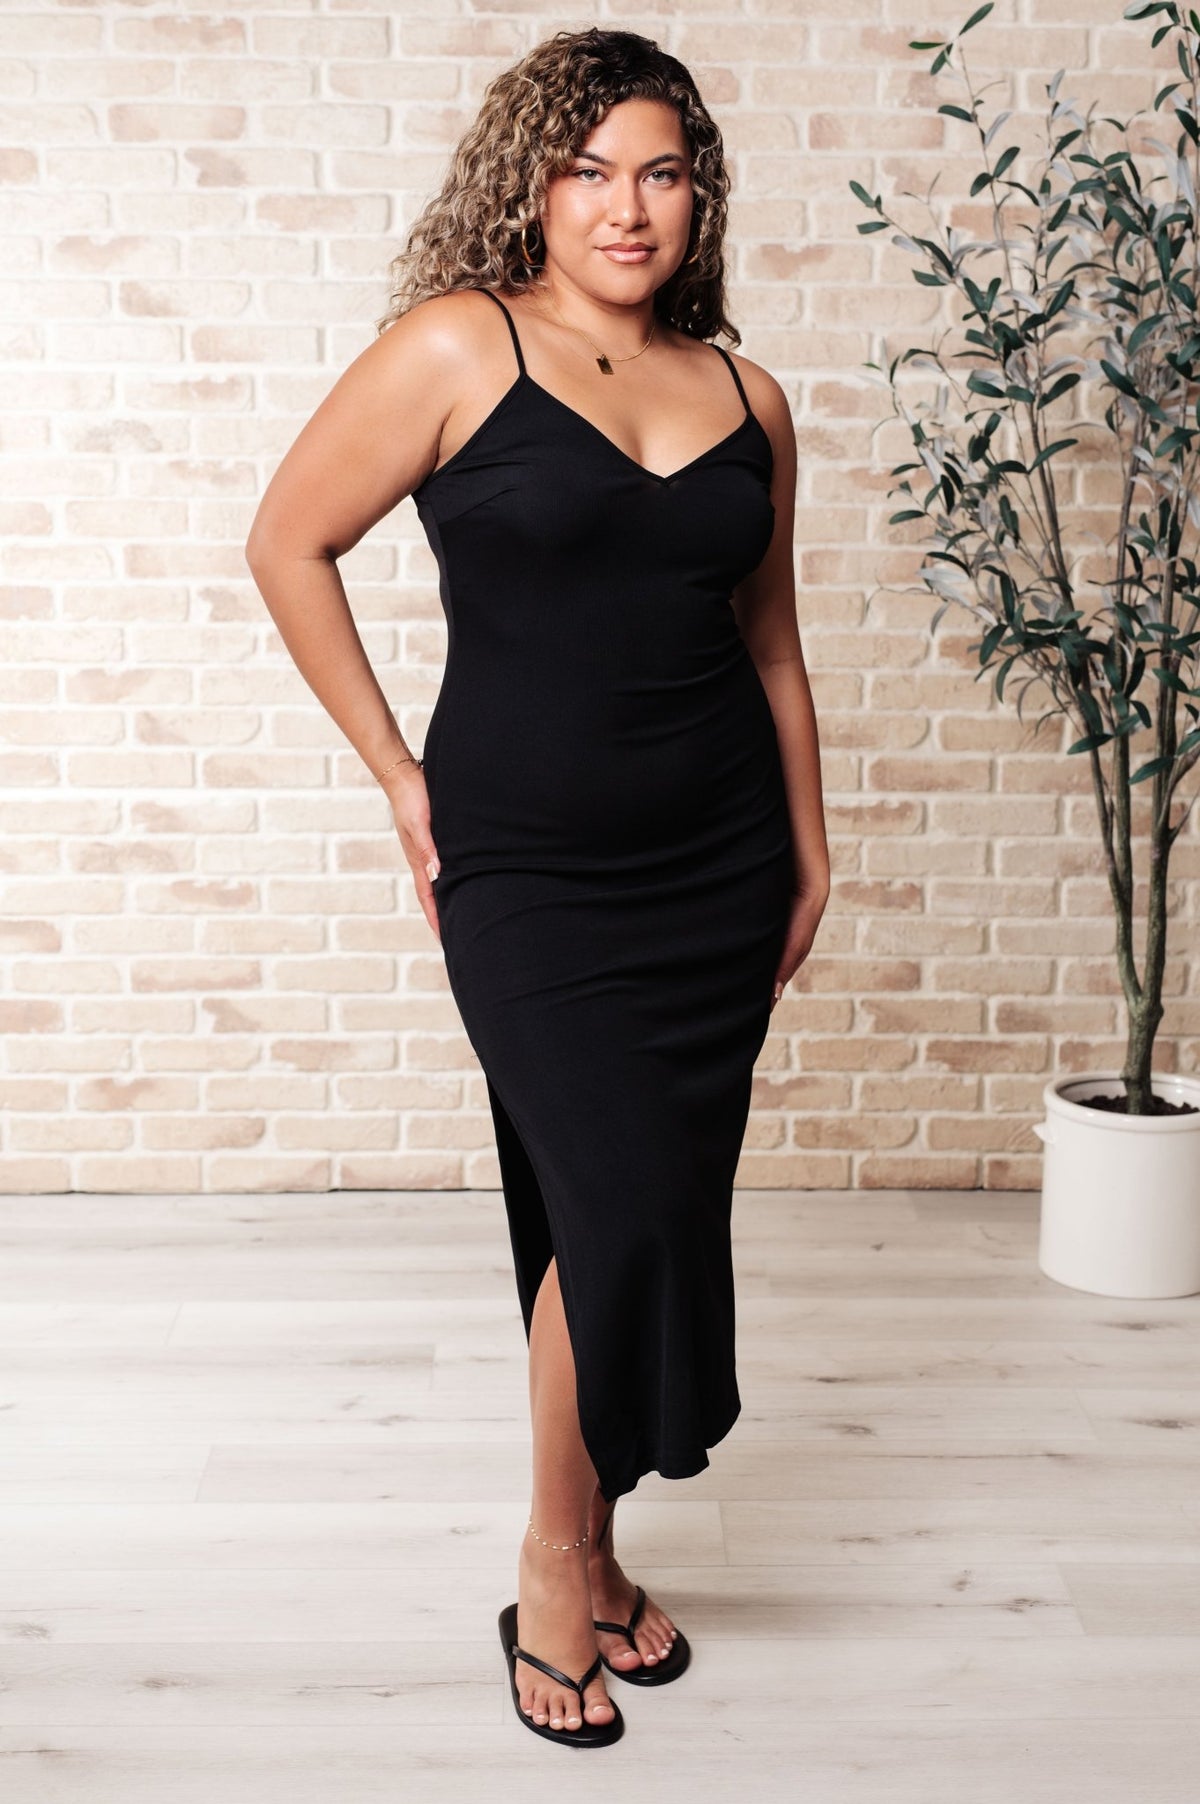 Bridgette Ribbed Bodycon Dress in Black - Happily Ever Atchison Shop Co.